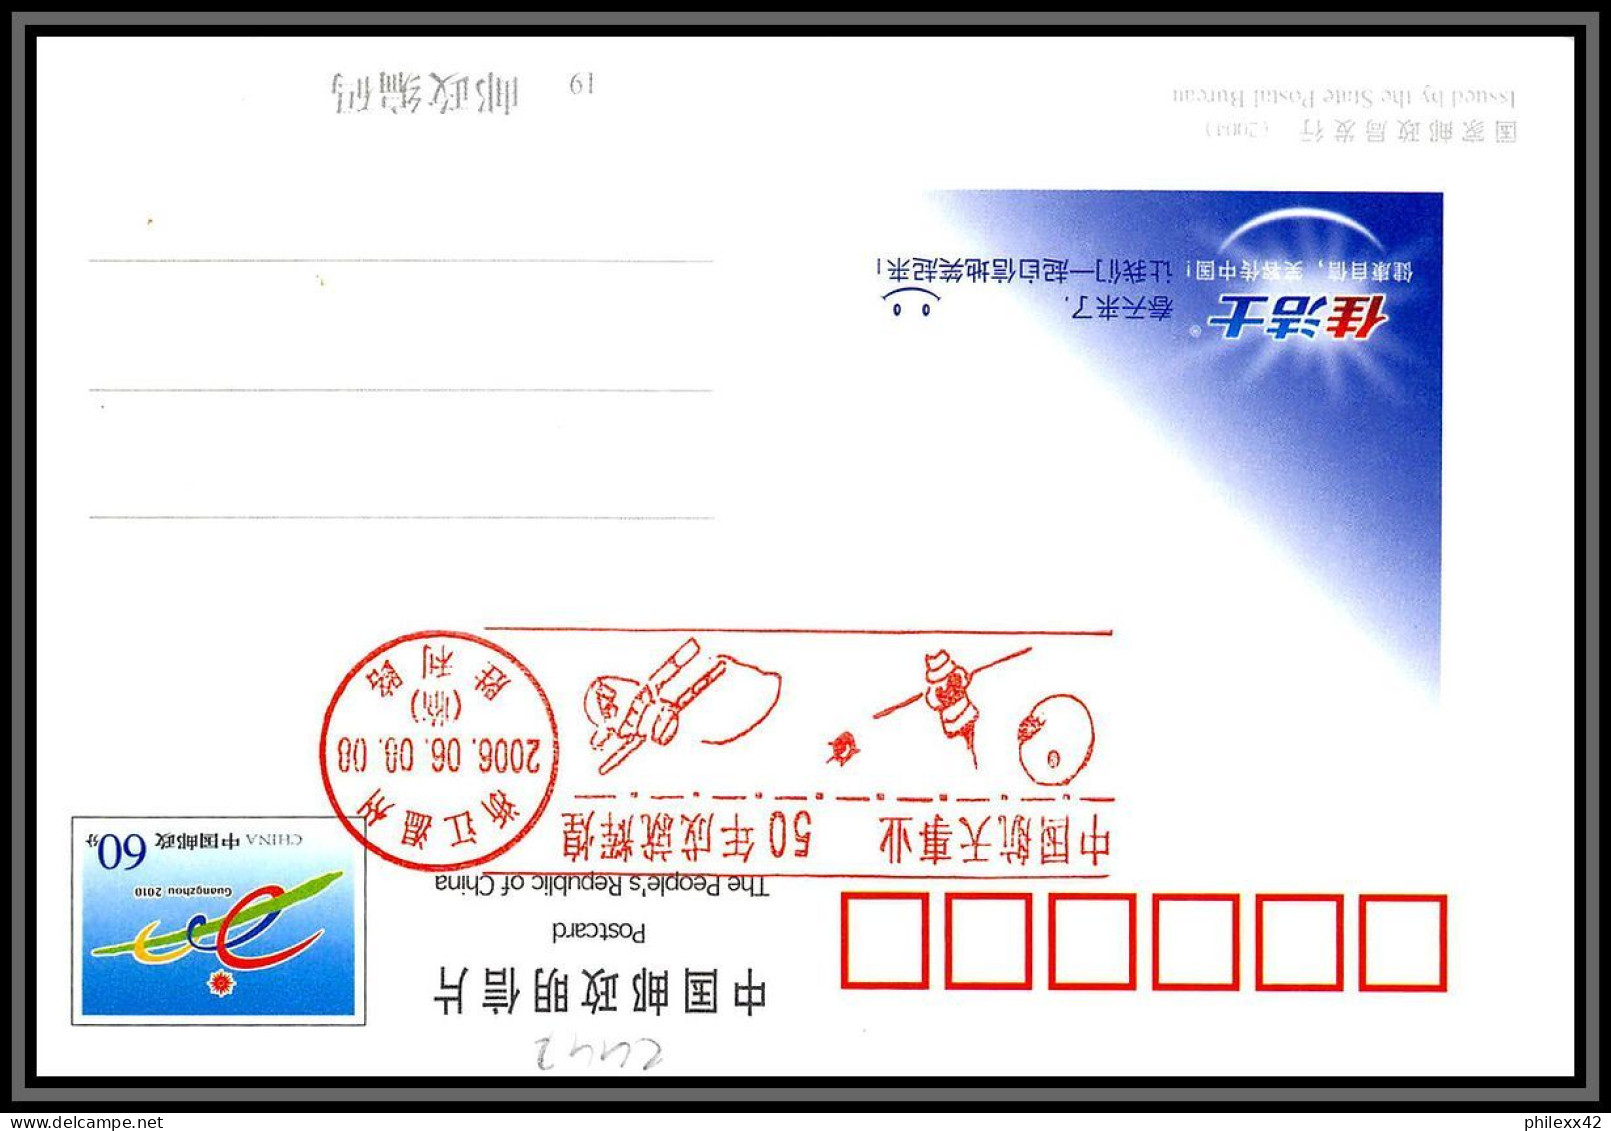 2447 Espace (space Raumfahrt) Lot De 2 Entier Postal (Stamped Stationery) Chine (china) 6/6/2008 - Azië